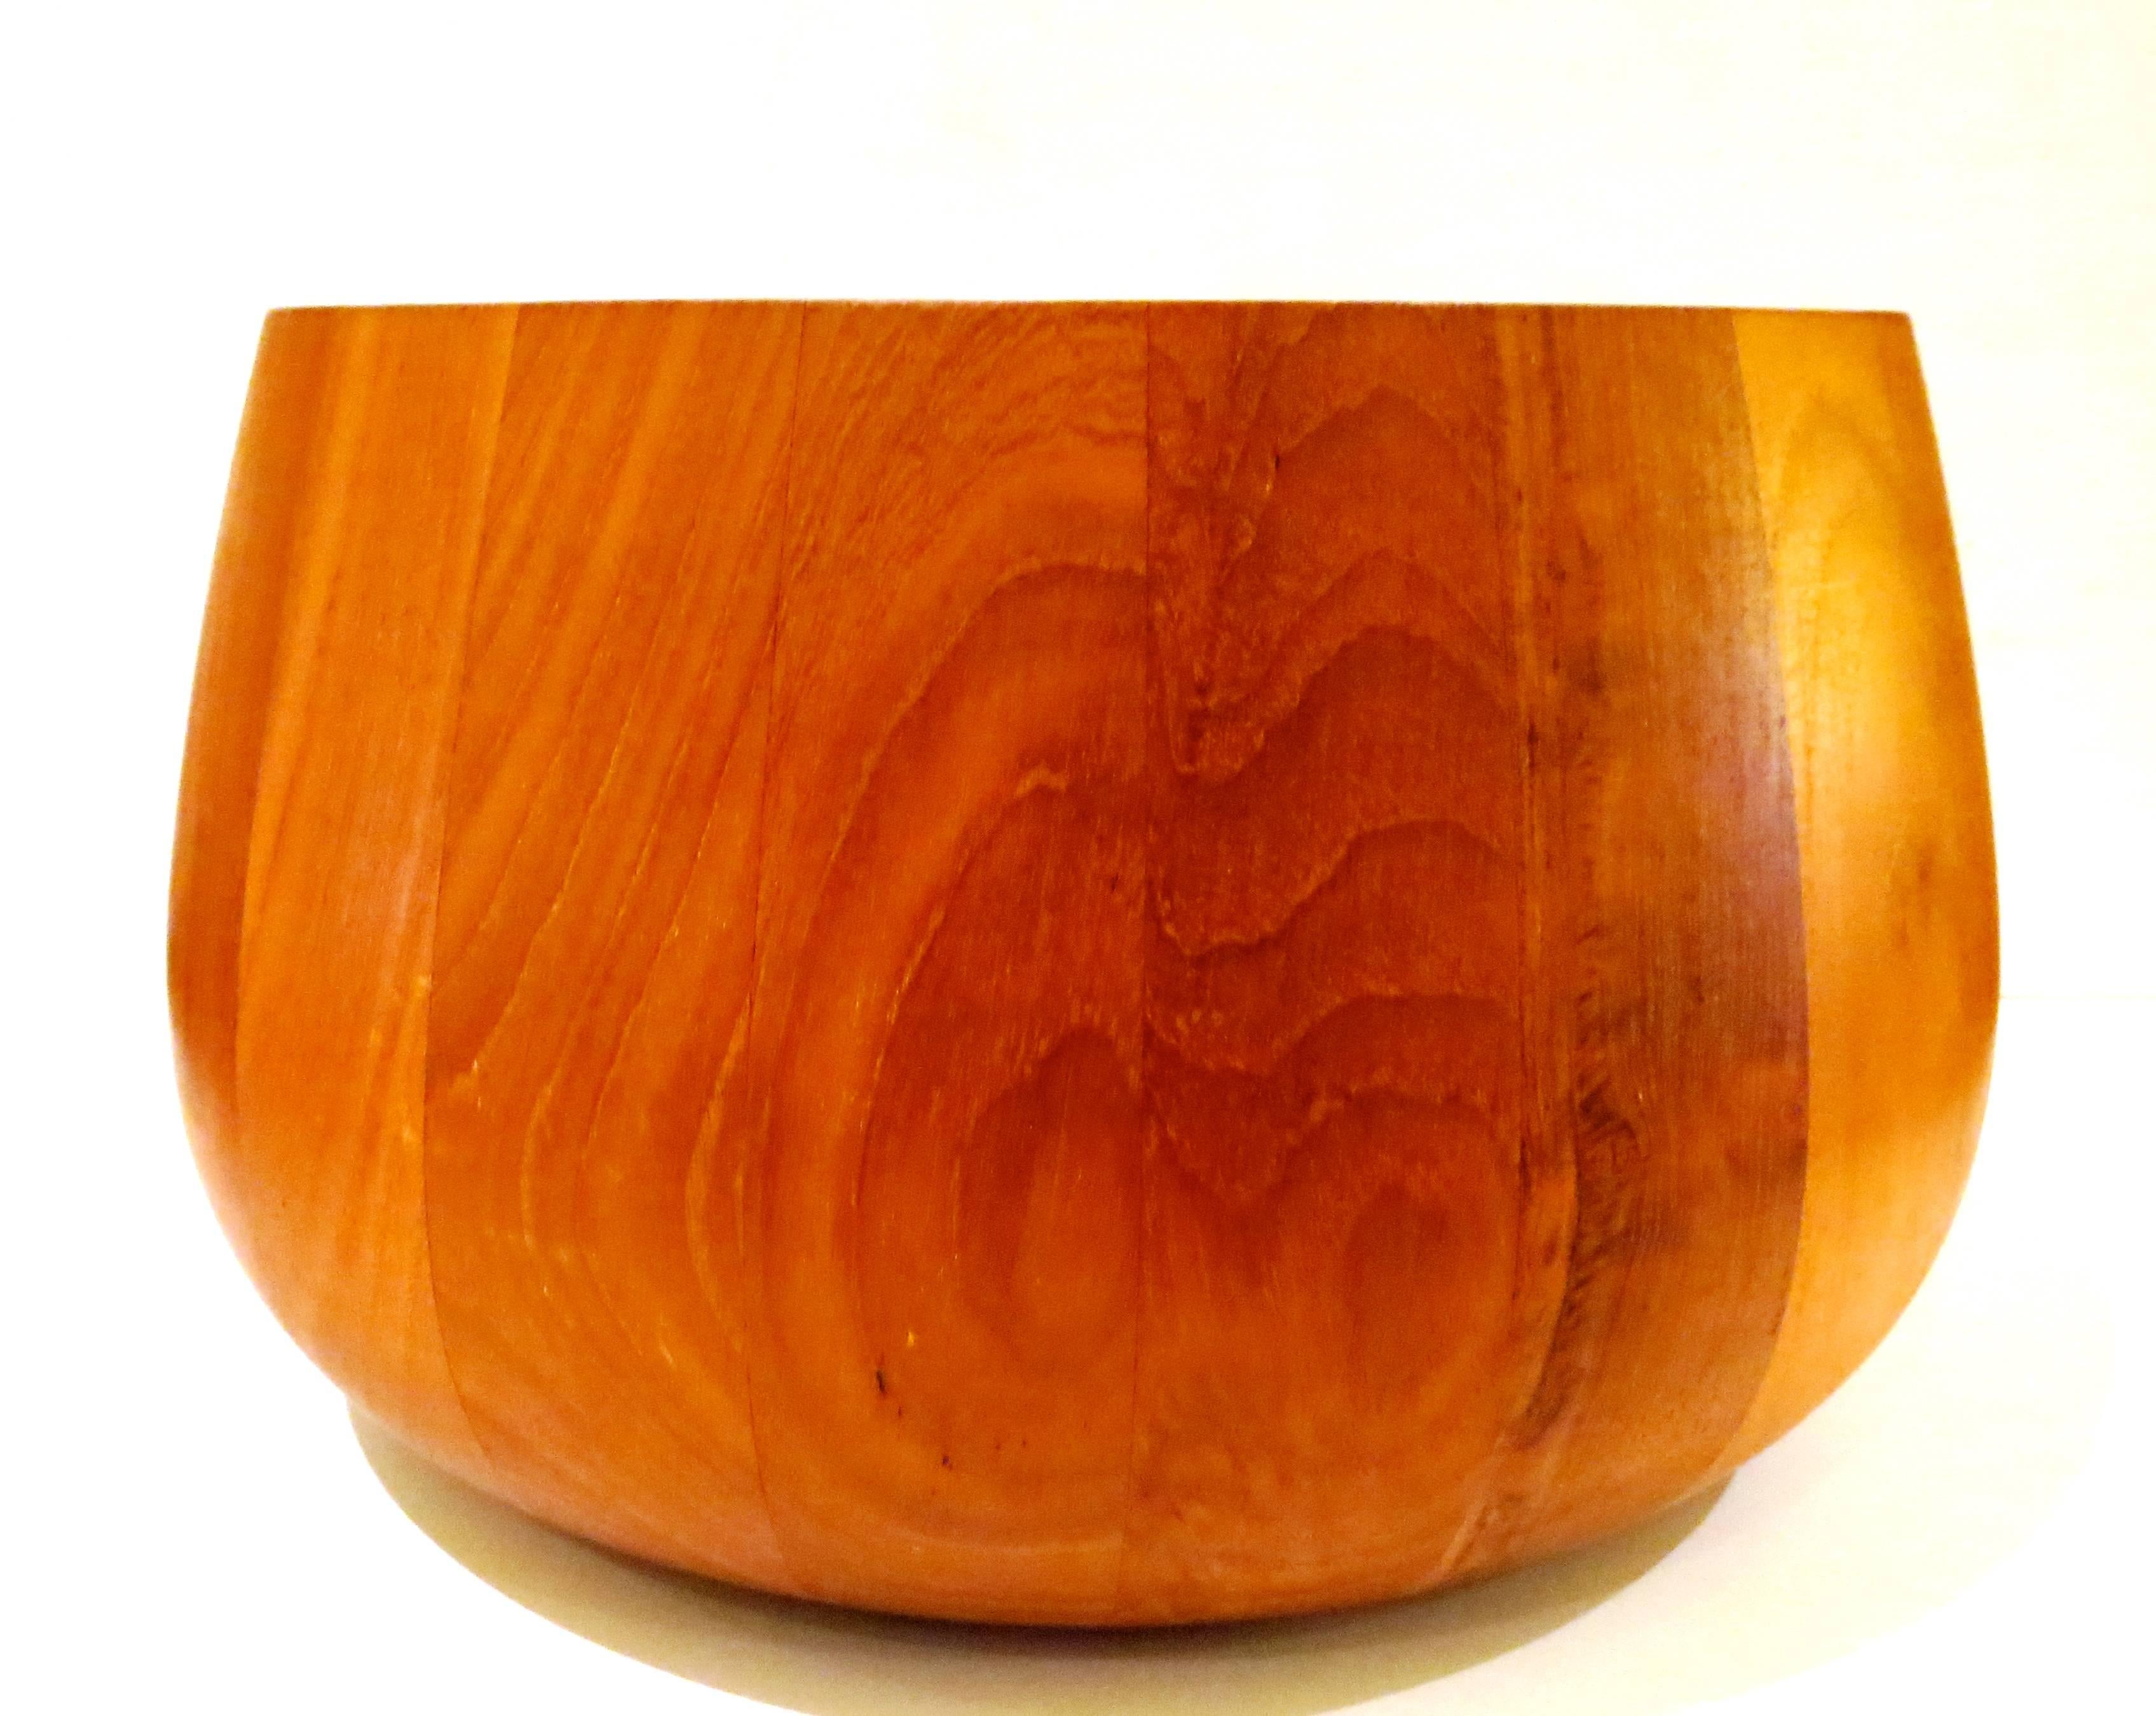 Rare shape on this solid teak, salad bowl designed by Quistgaard for Dansk, circa 1950s great condition early production.